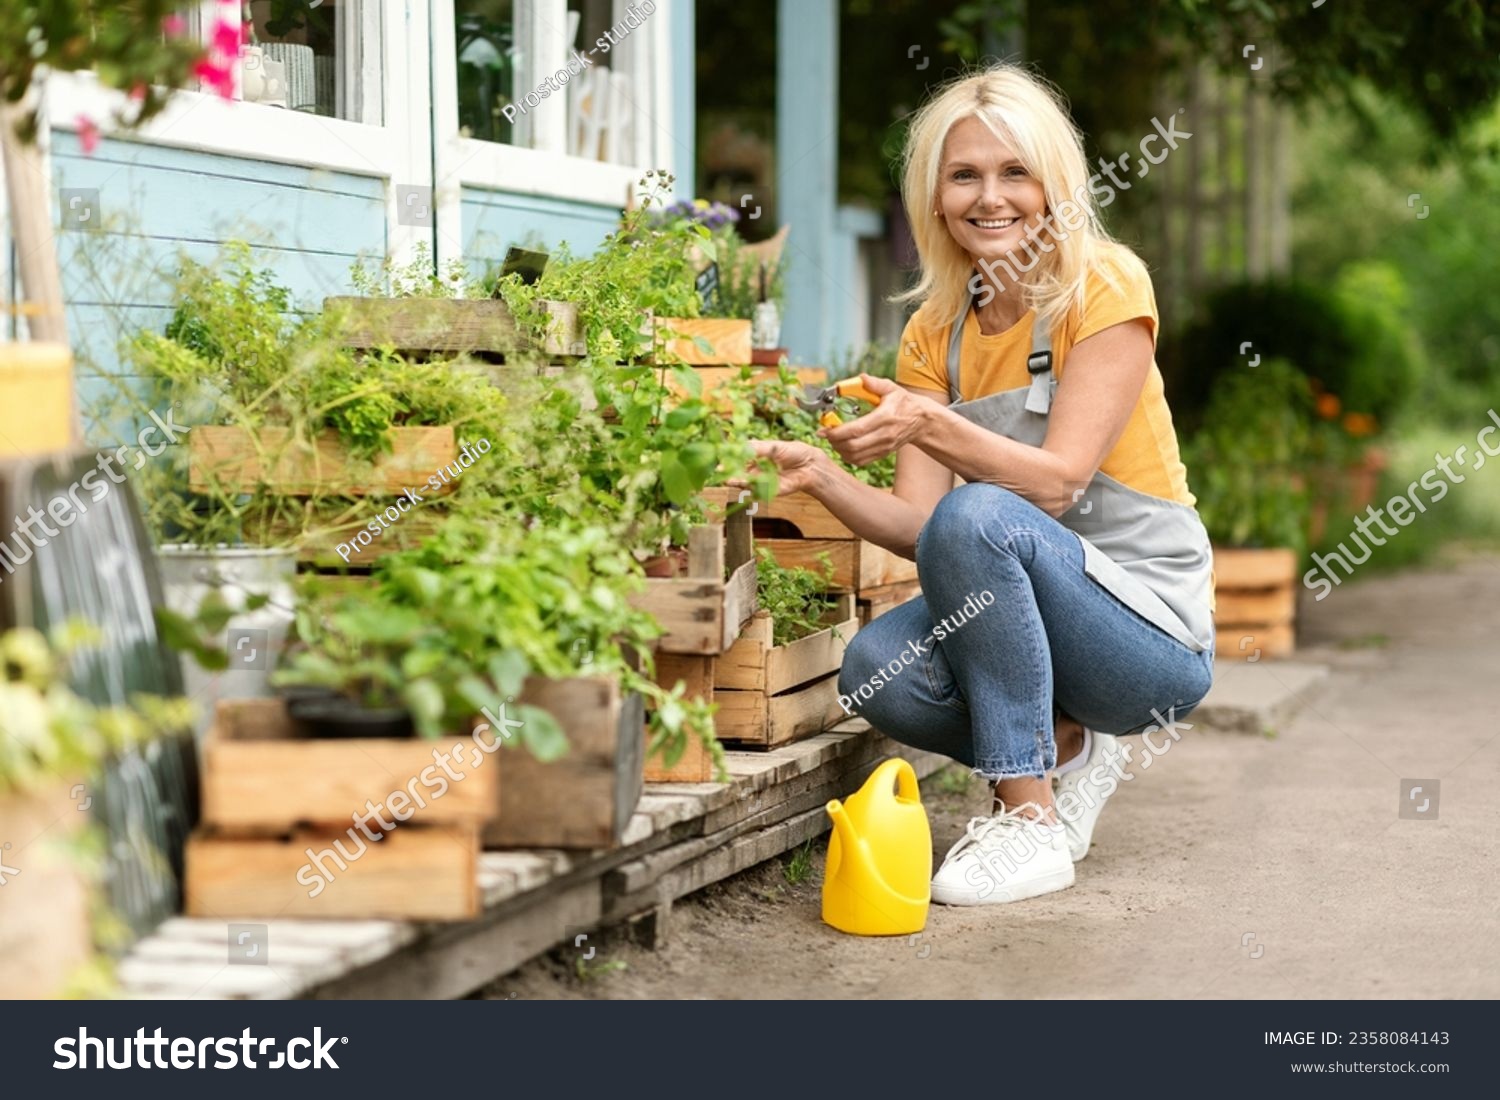 Smiling Mature Woman Taking Care About Plants In Crates At Her Backyard, Happy Beautiful Senior Lady Wearing Apron Enjoying Gardening And Eco Farming, Using Pruning Shears Secateurs, Free Space #2358084143